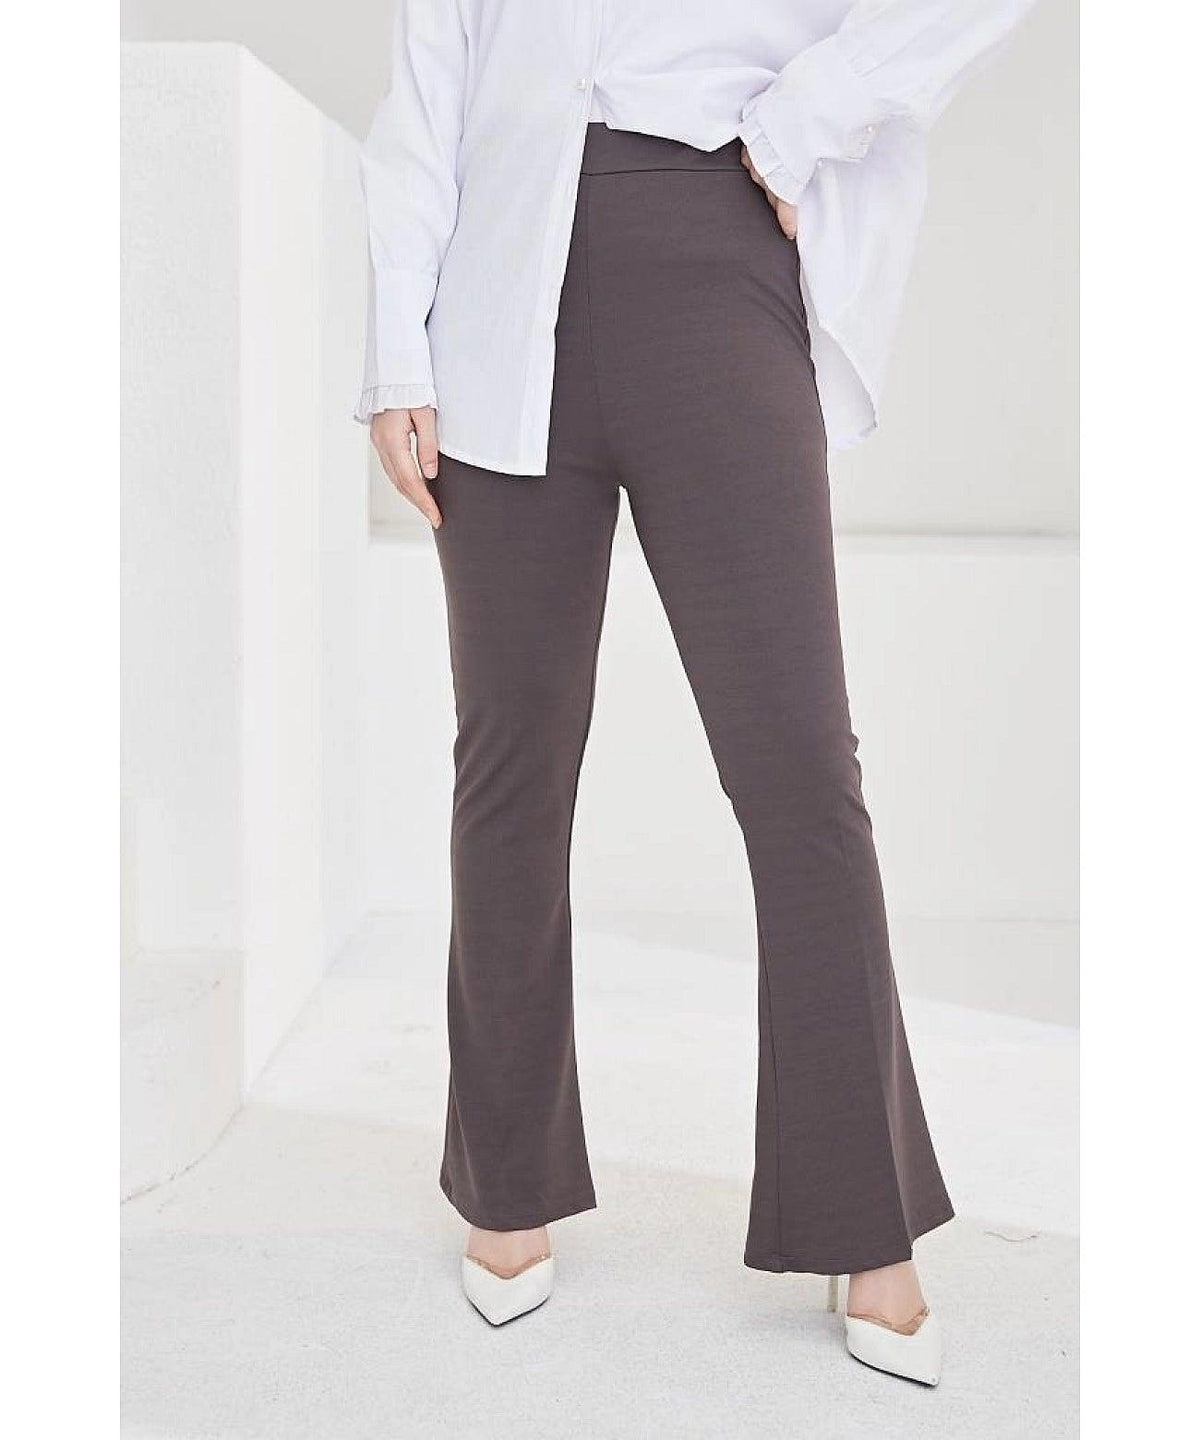 Flare Dress Pants for Women - Anthracite Grey